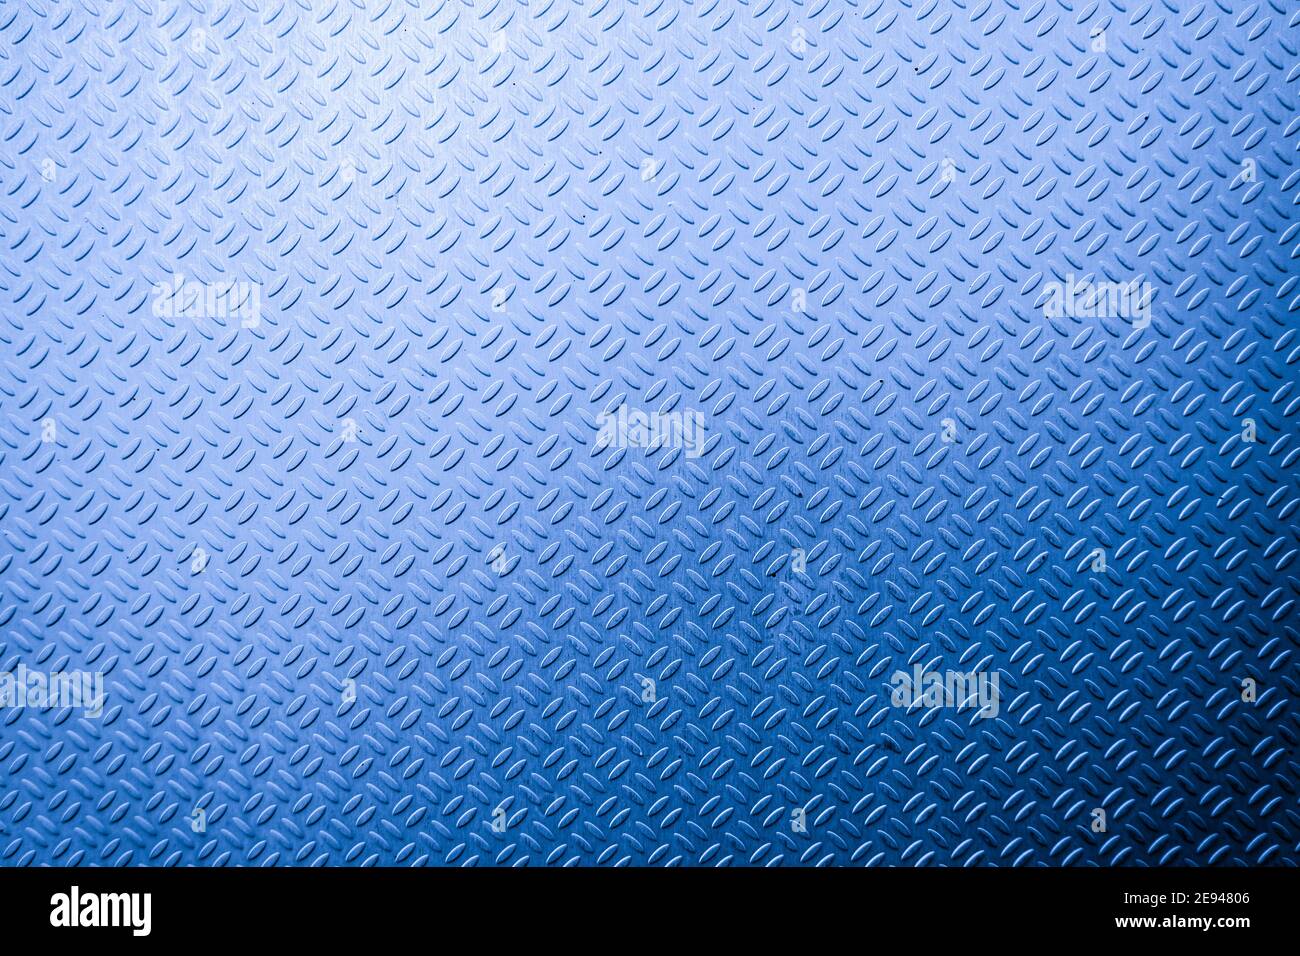 Background of Metal Diamond Plate in blue Color Stock Photo